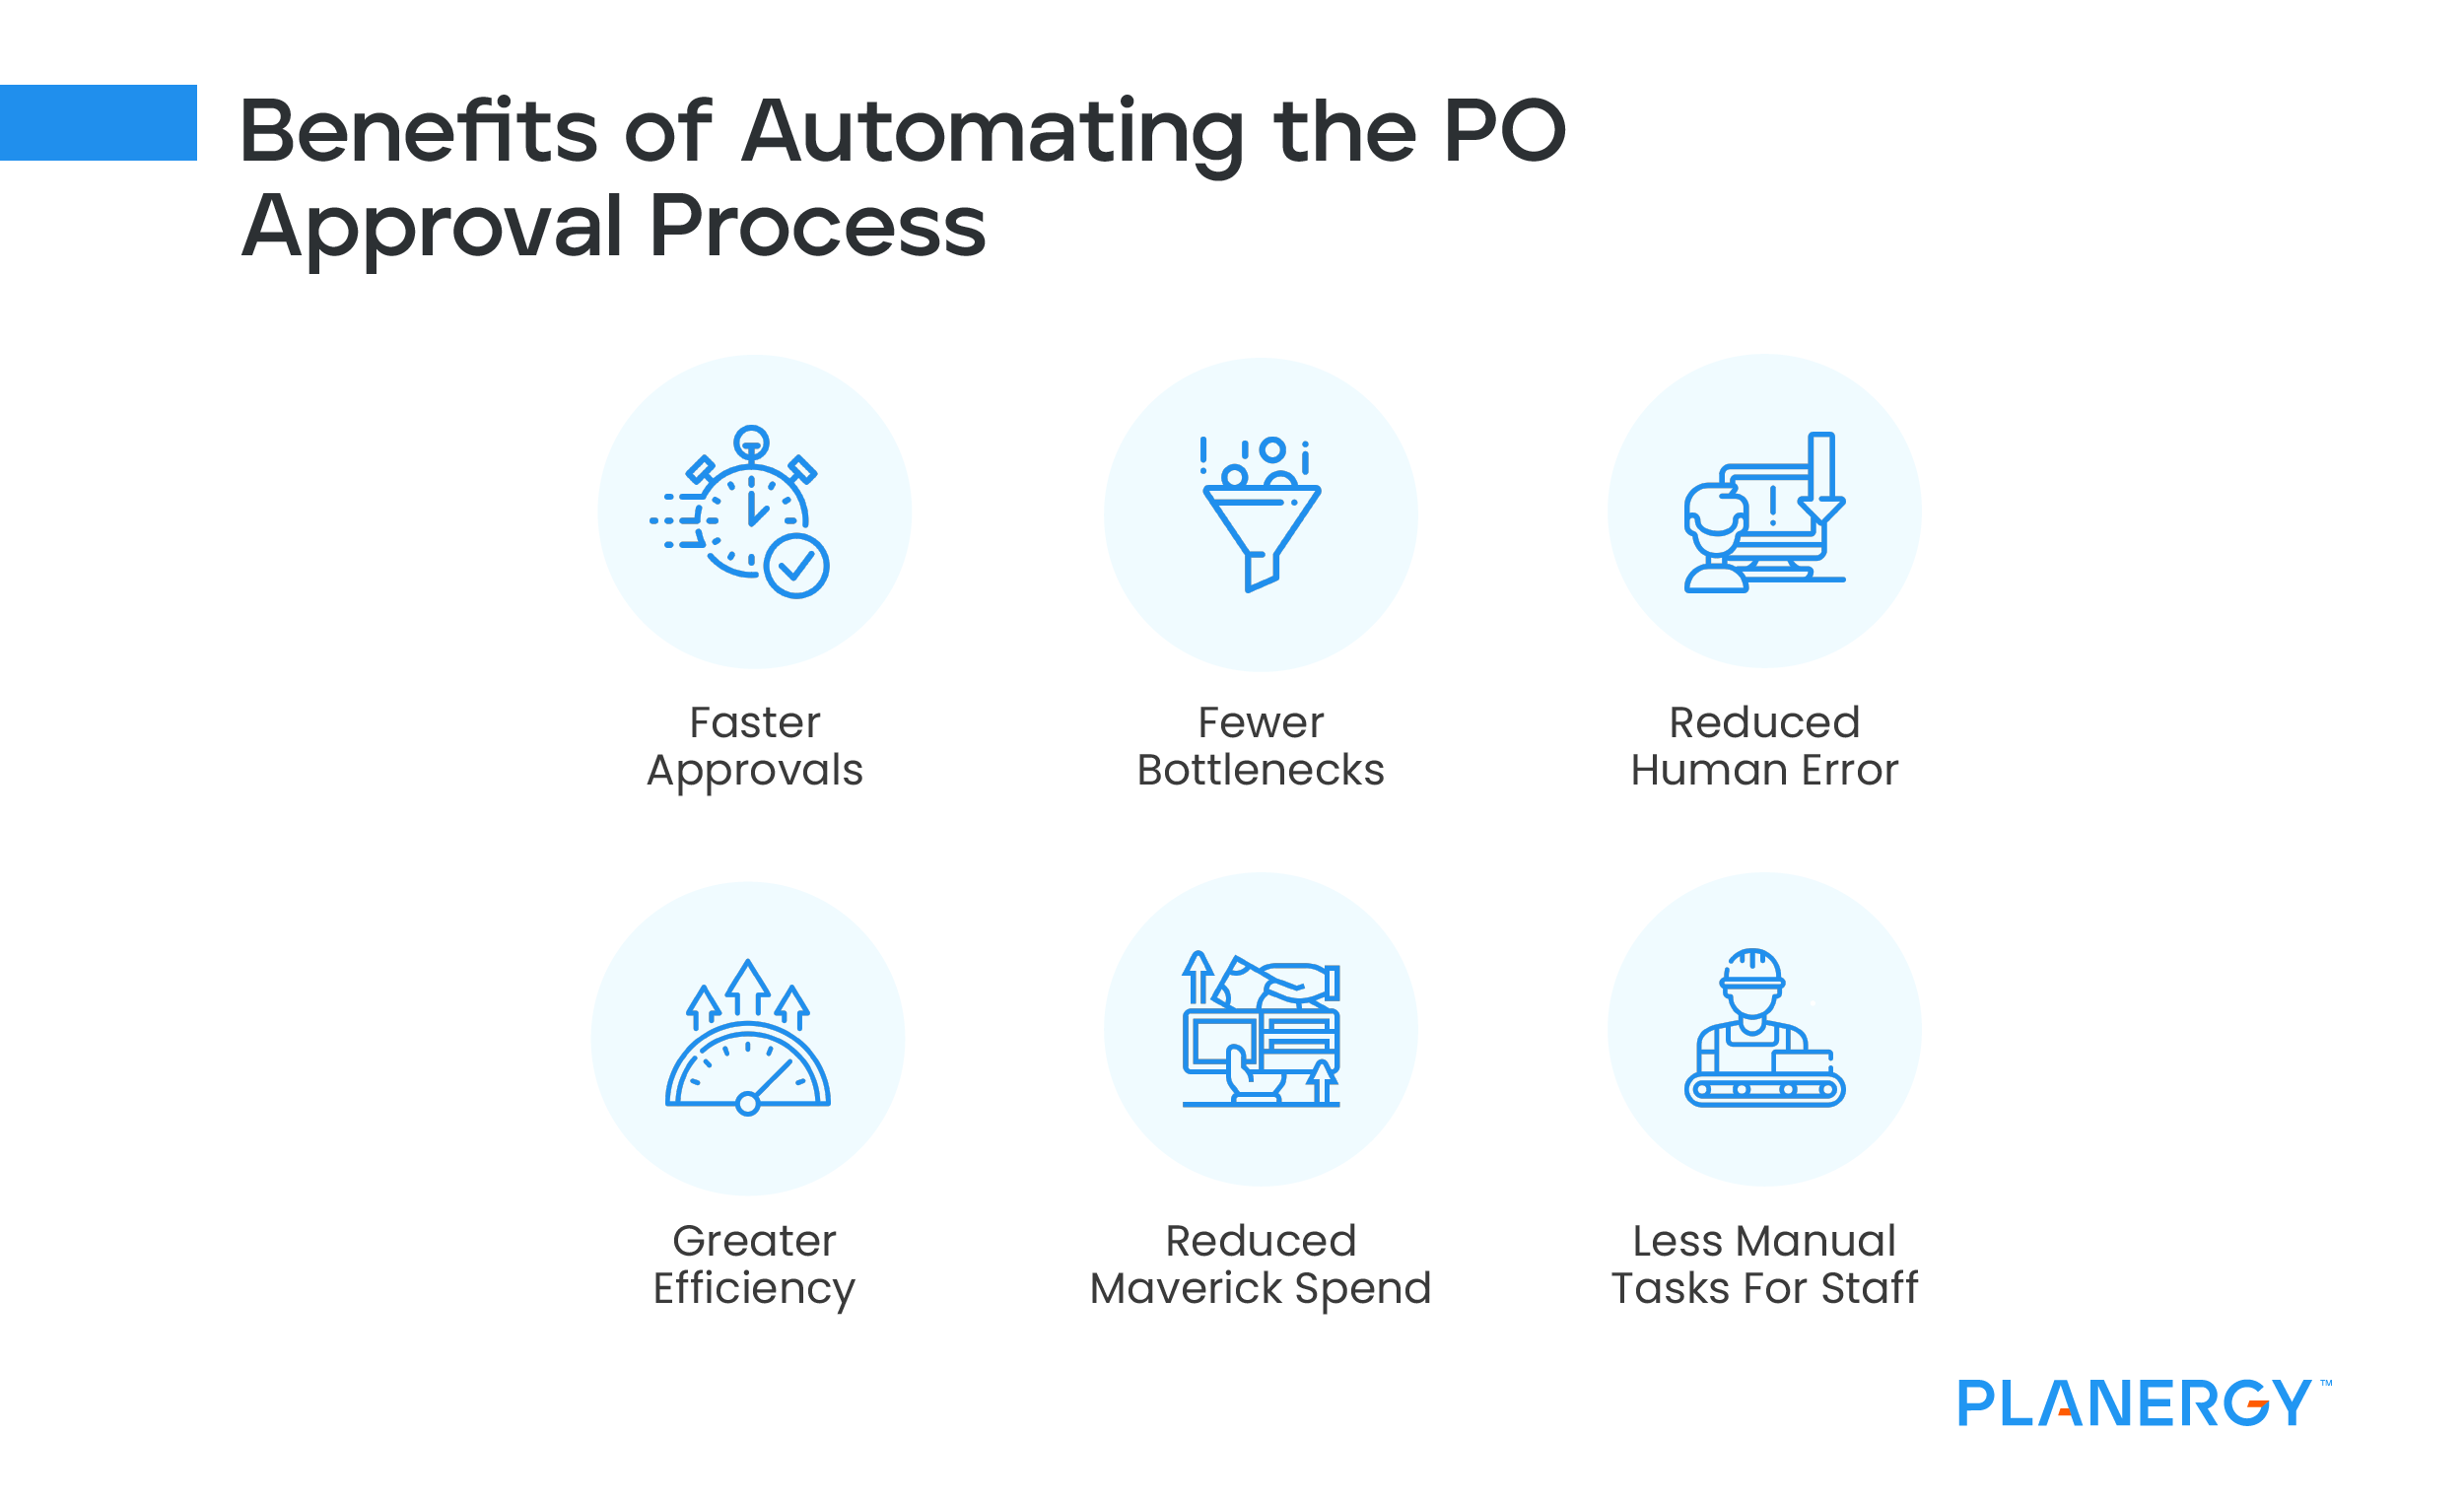 Benefits of Automating Po Approval Process